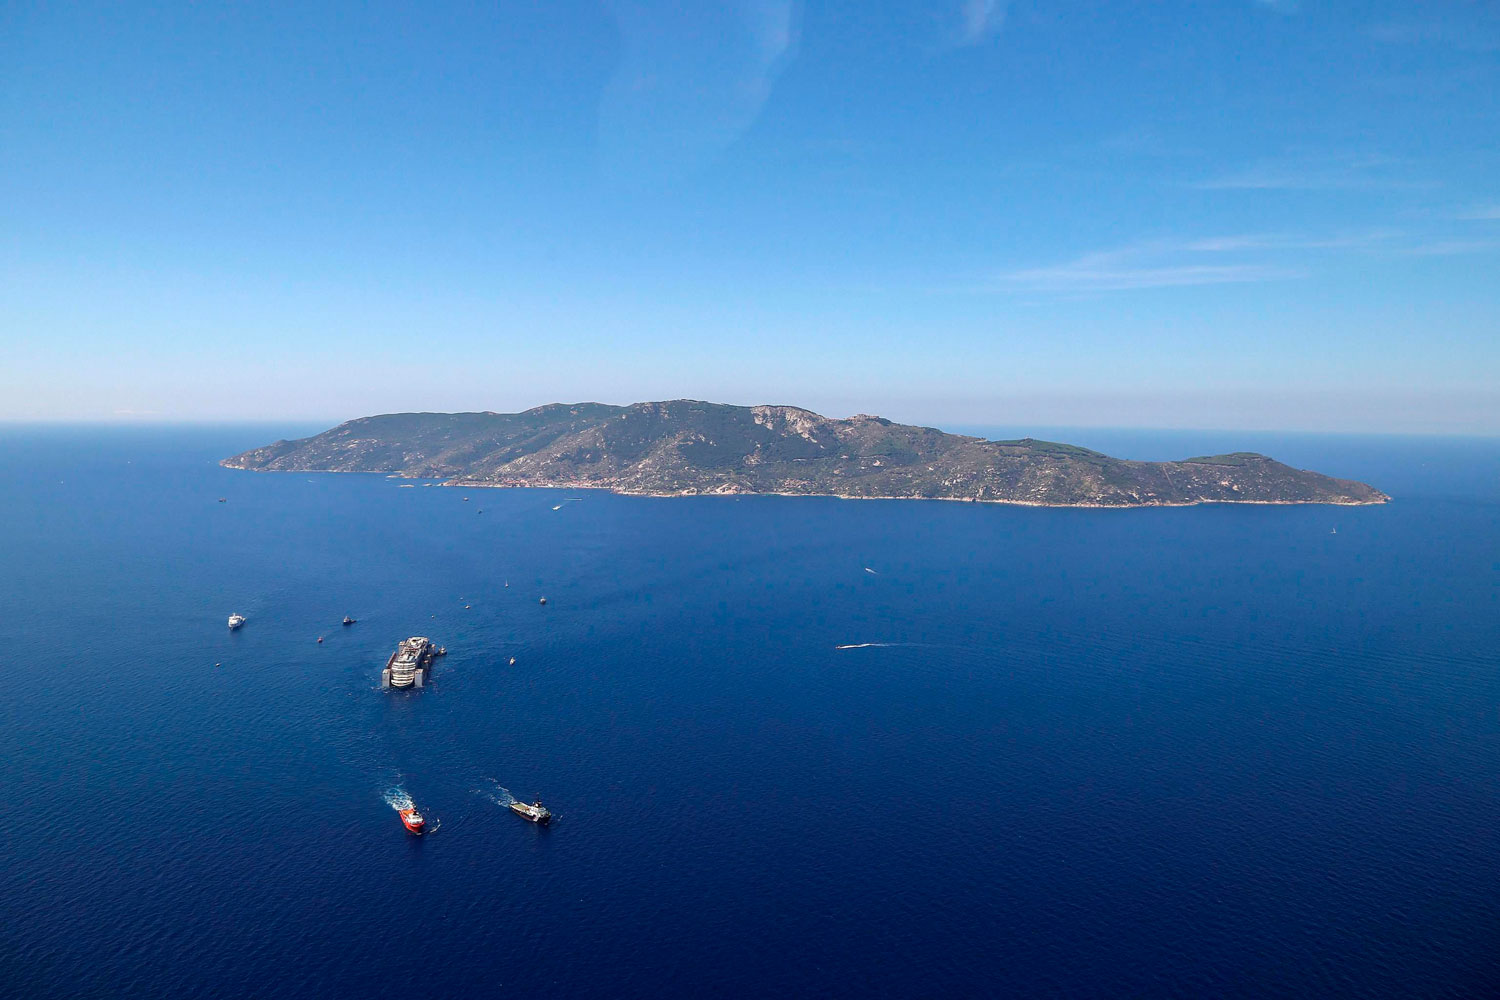 An aerial photo of the wrecked Italian cruise liner the Costa Concordia as it is towed on its final journey to the port of Genoa, Italy from Giglio Island, Italy 240 kilometers away on July 23, 2014.